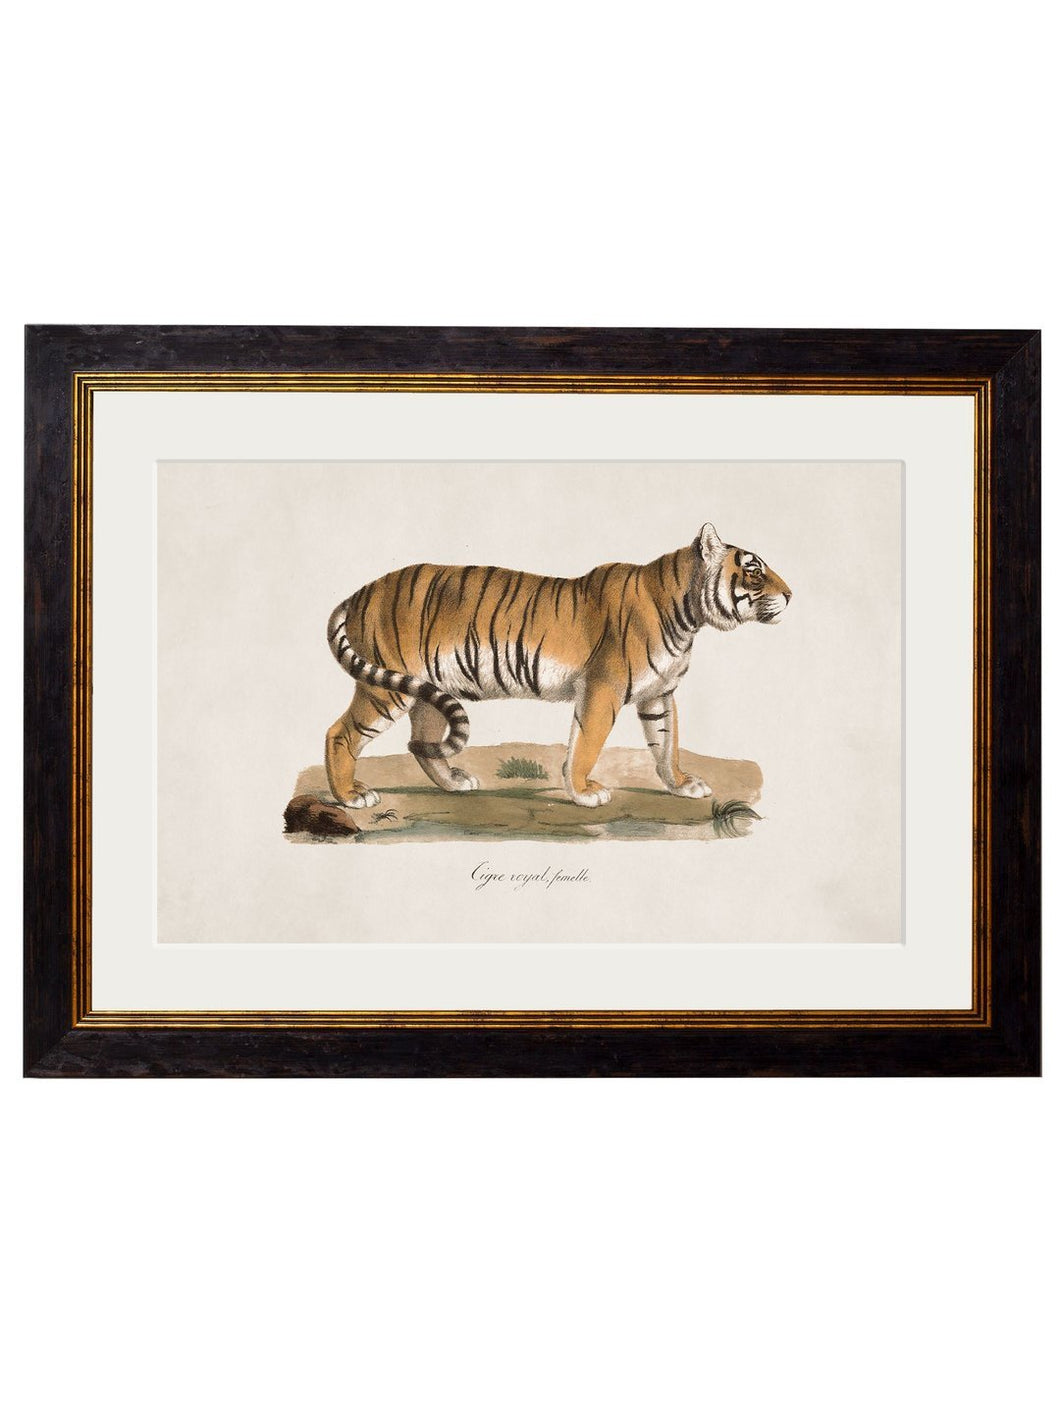 Framed 1824 Tiger Print - Referenced from a French 1800s Hand-Coloured PrintVintage FrogPictures & Prints